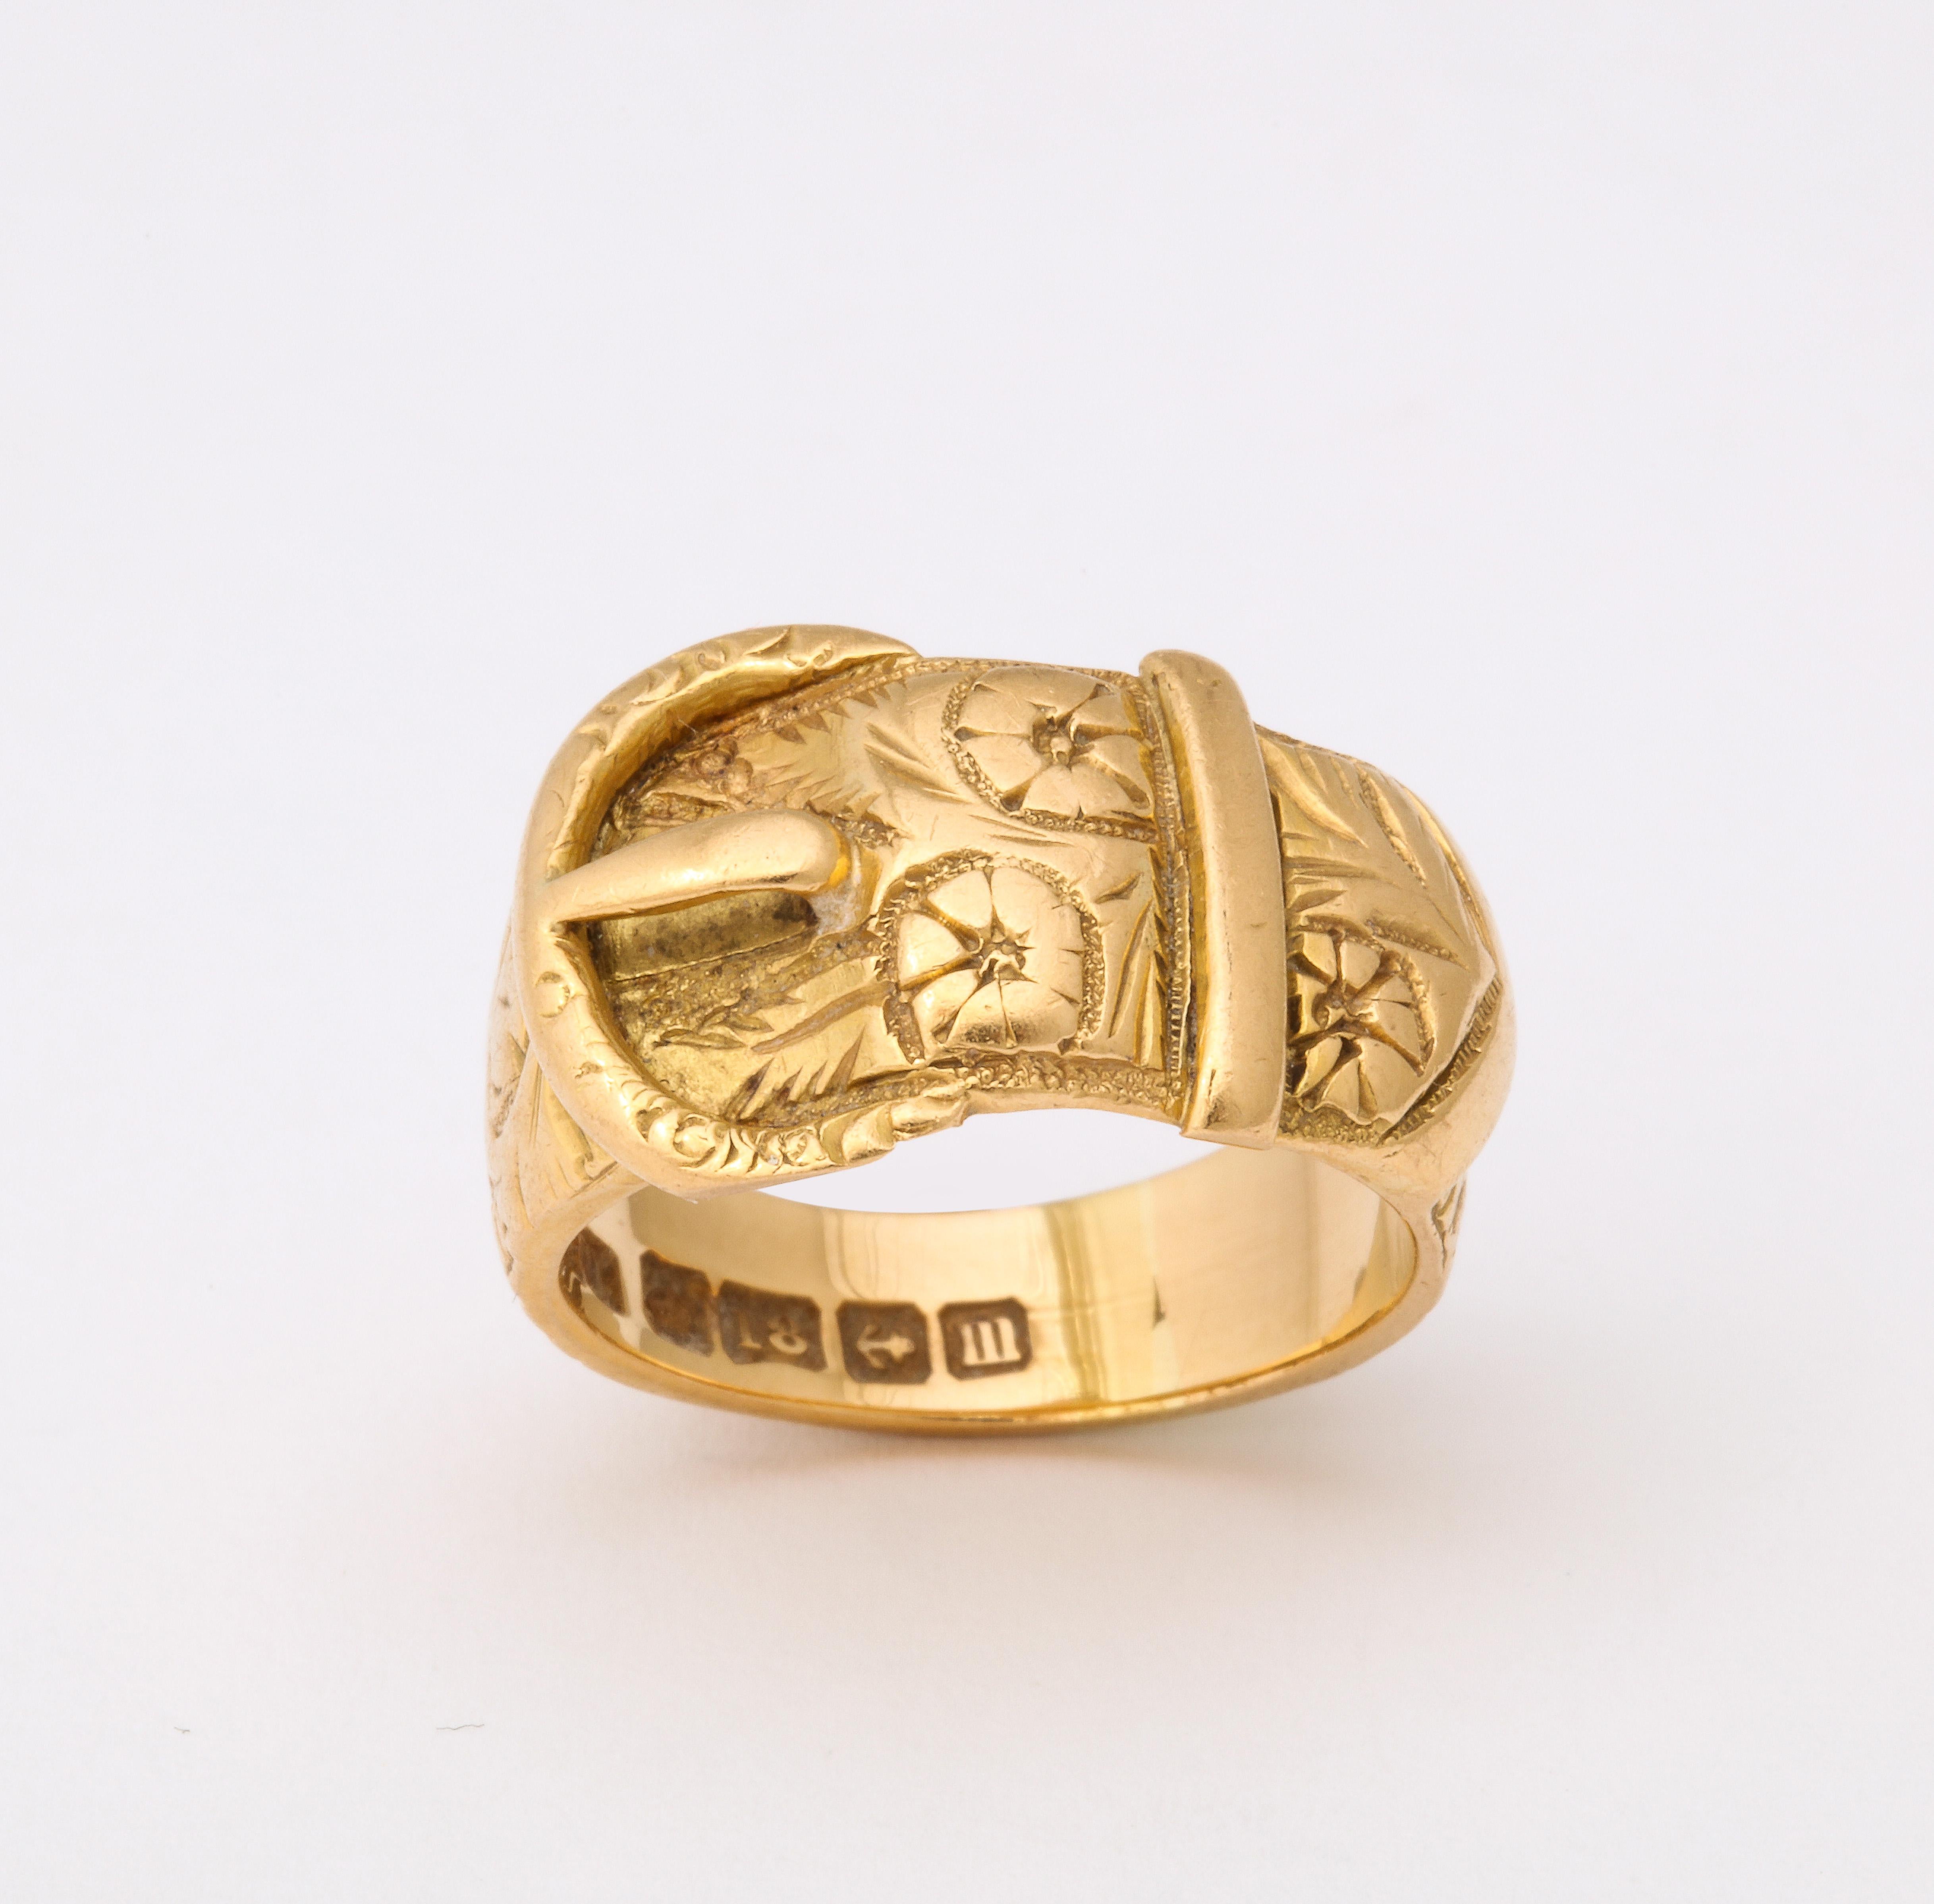 gold belt buckle ring meaning